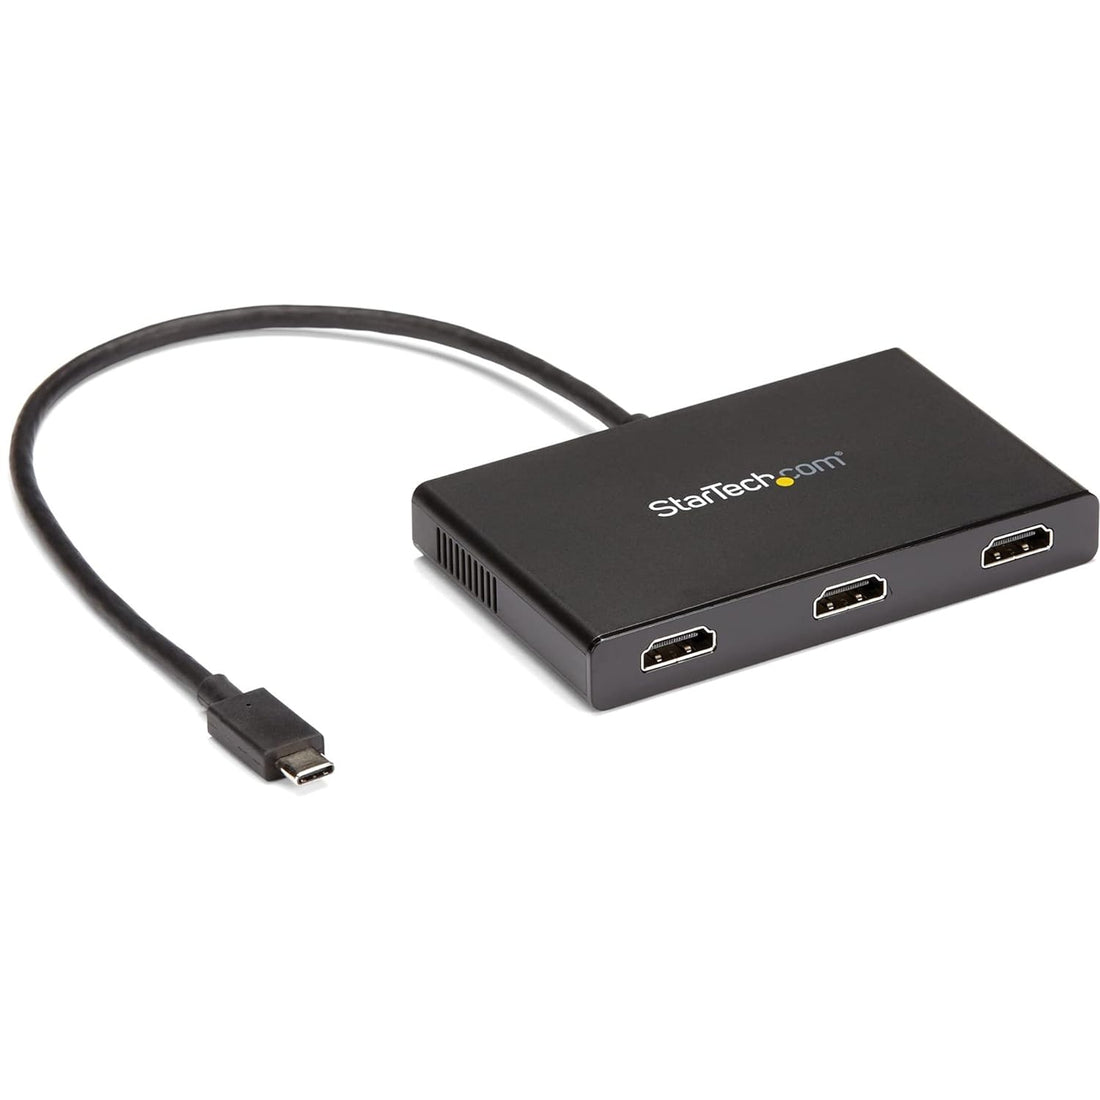 USB C to HDMI Multi-Monitor Adapter - 3 Port MST Hub - USB Type C to HDMI - Monitor Splitter - USB 3.1 Type C